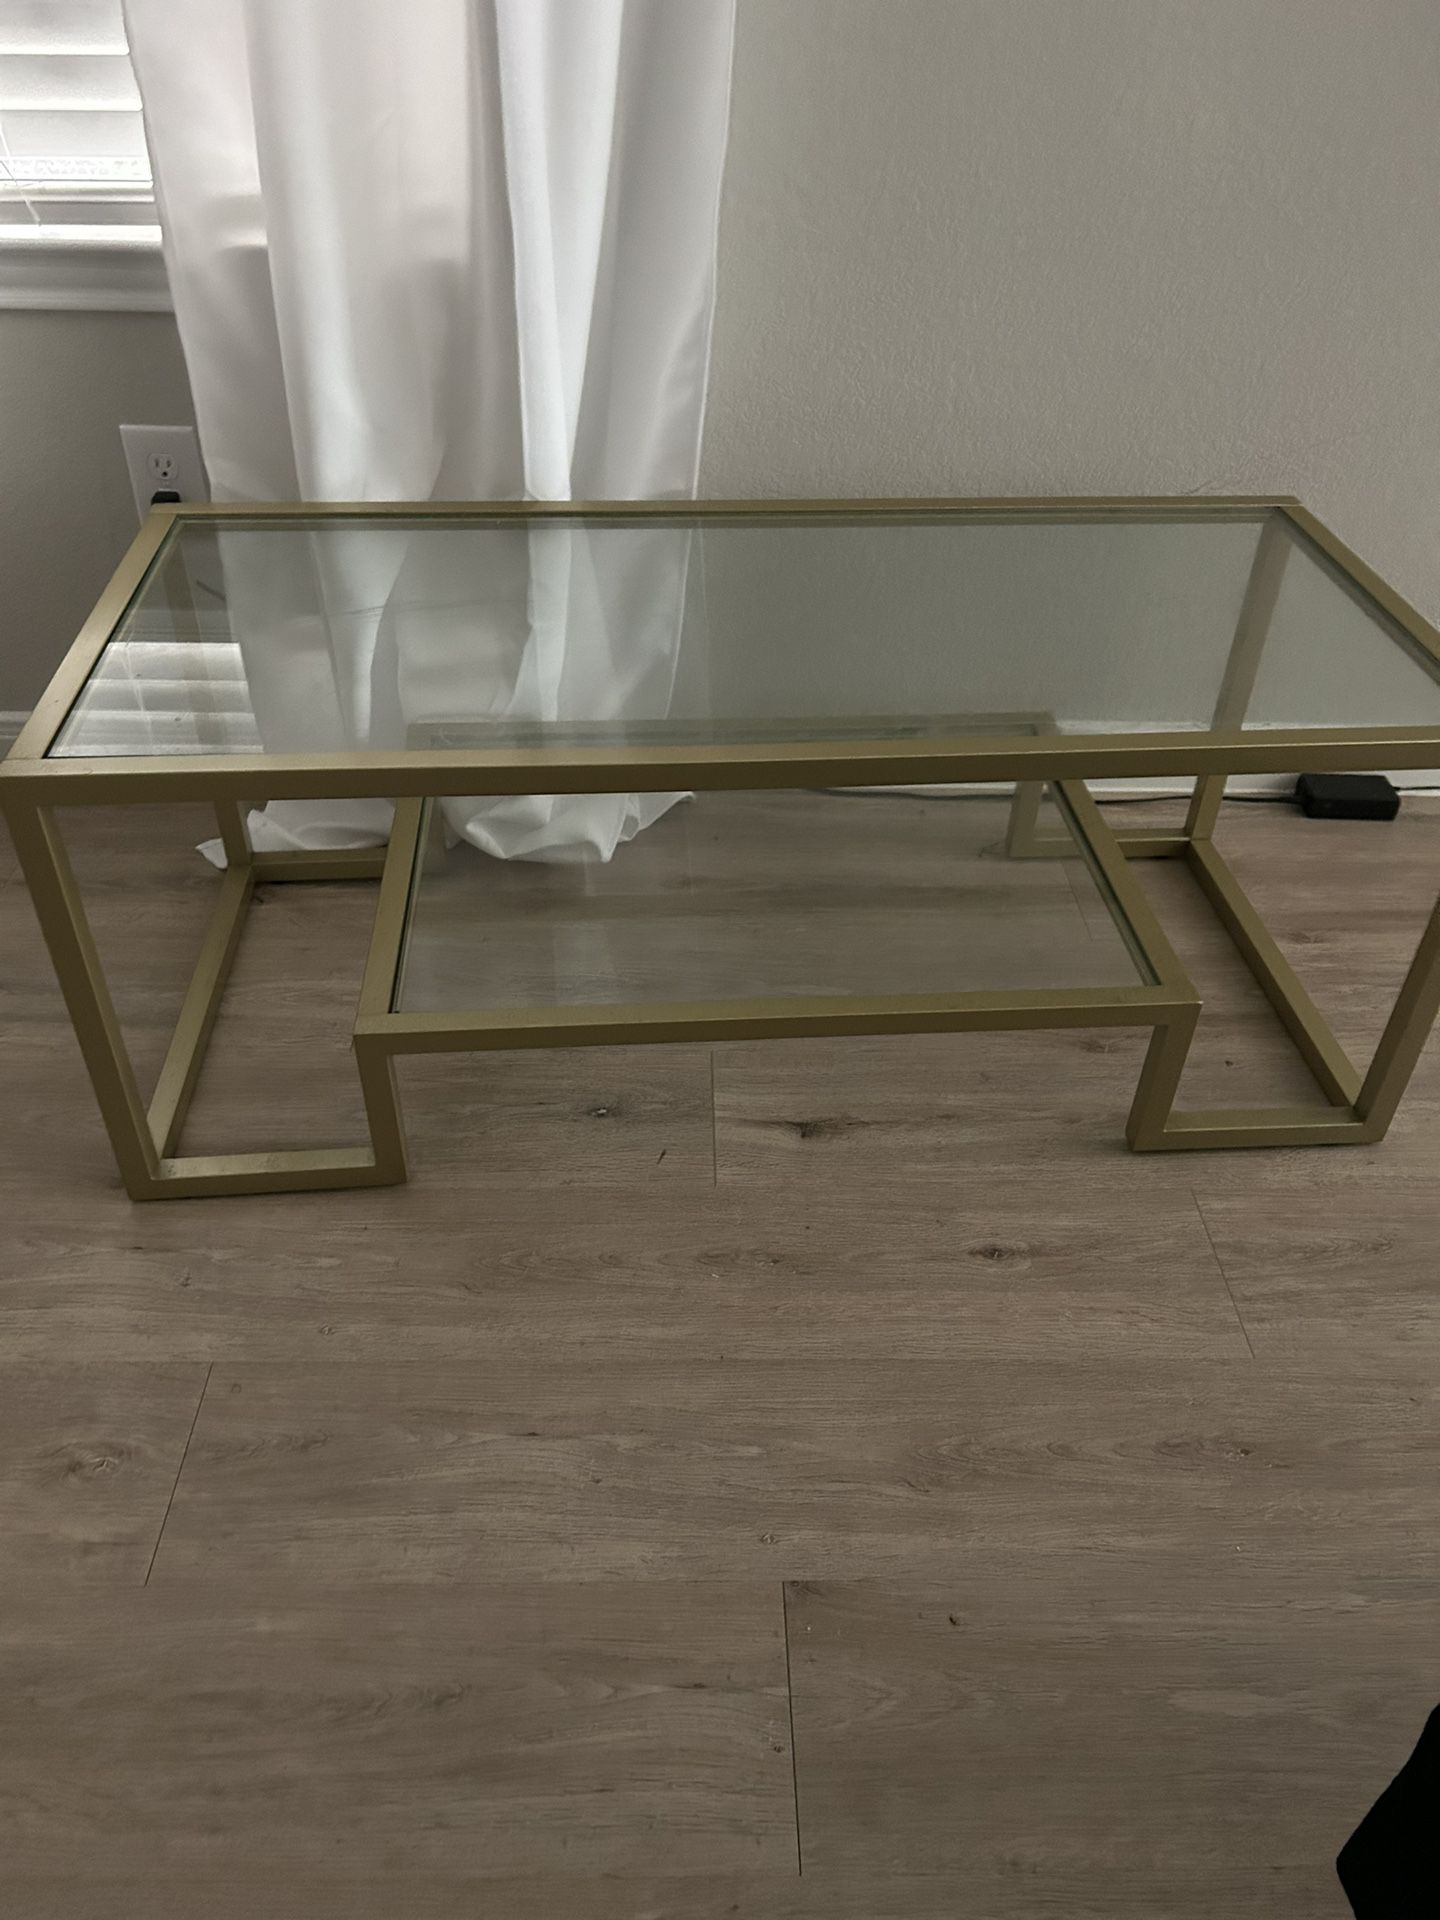 Glass Coffee Table Gold Trim